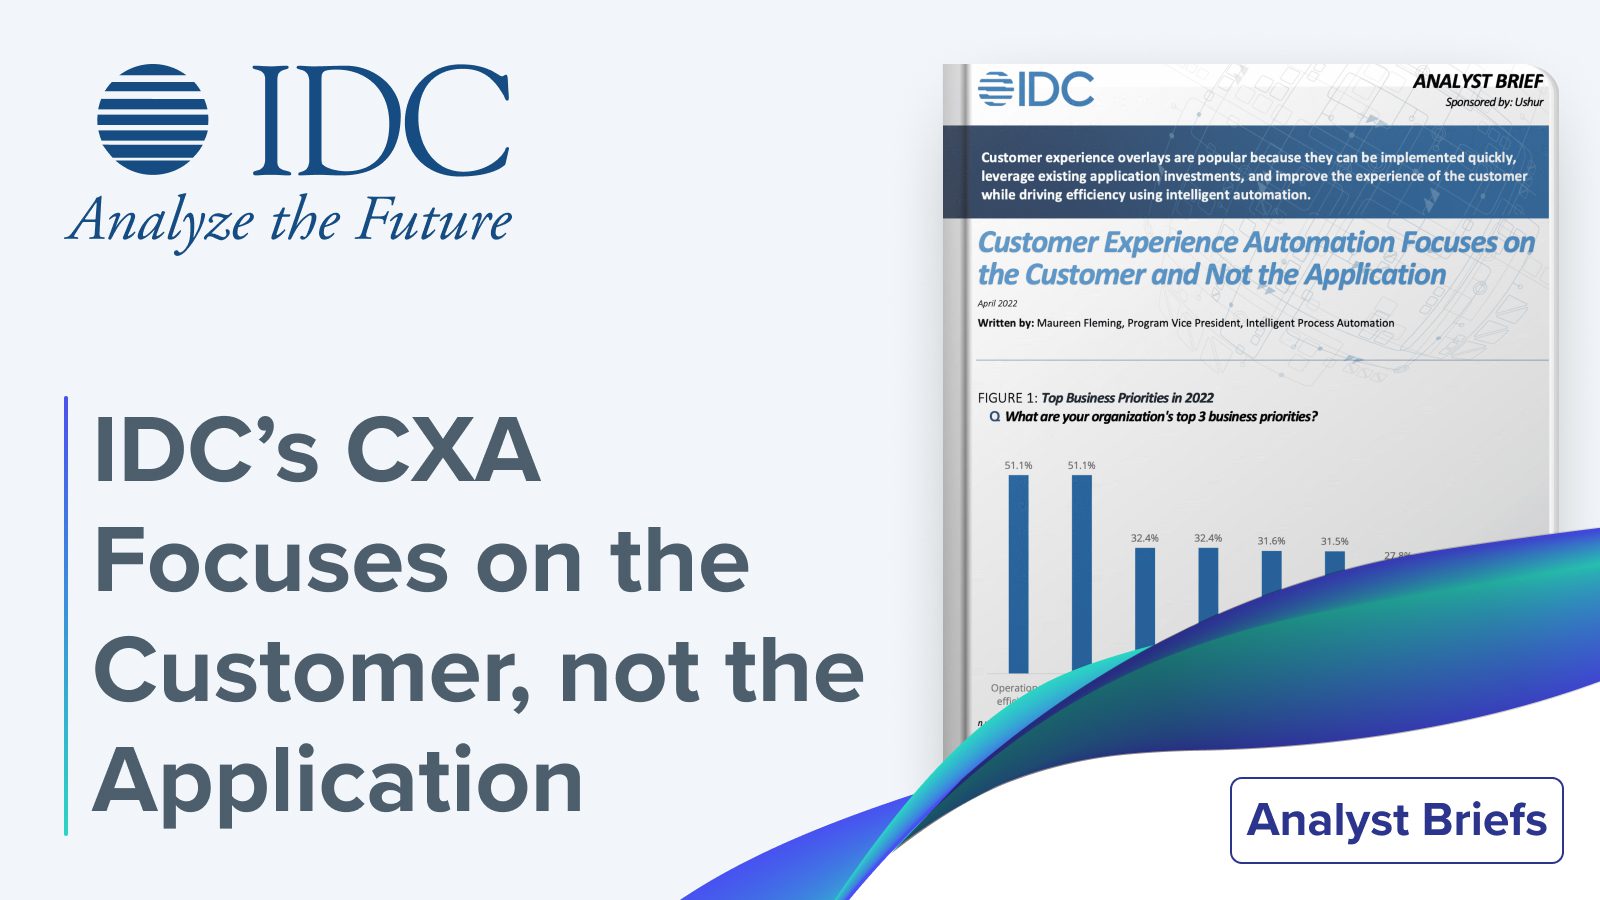 IDC’s CXA Focuses on the Customer, not the Application cover image